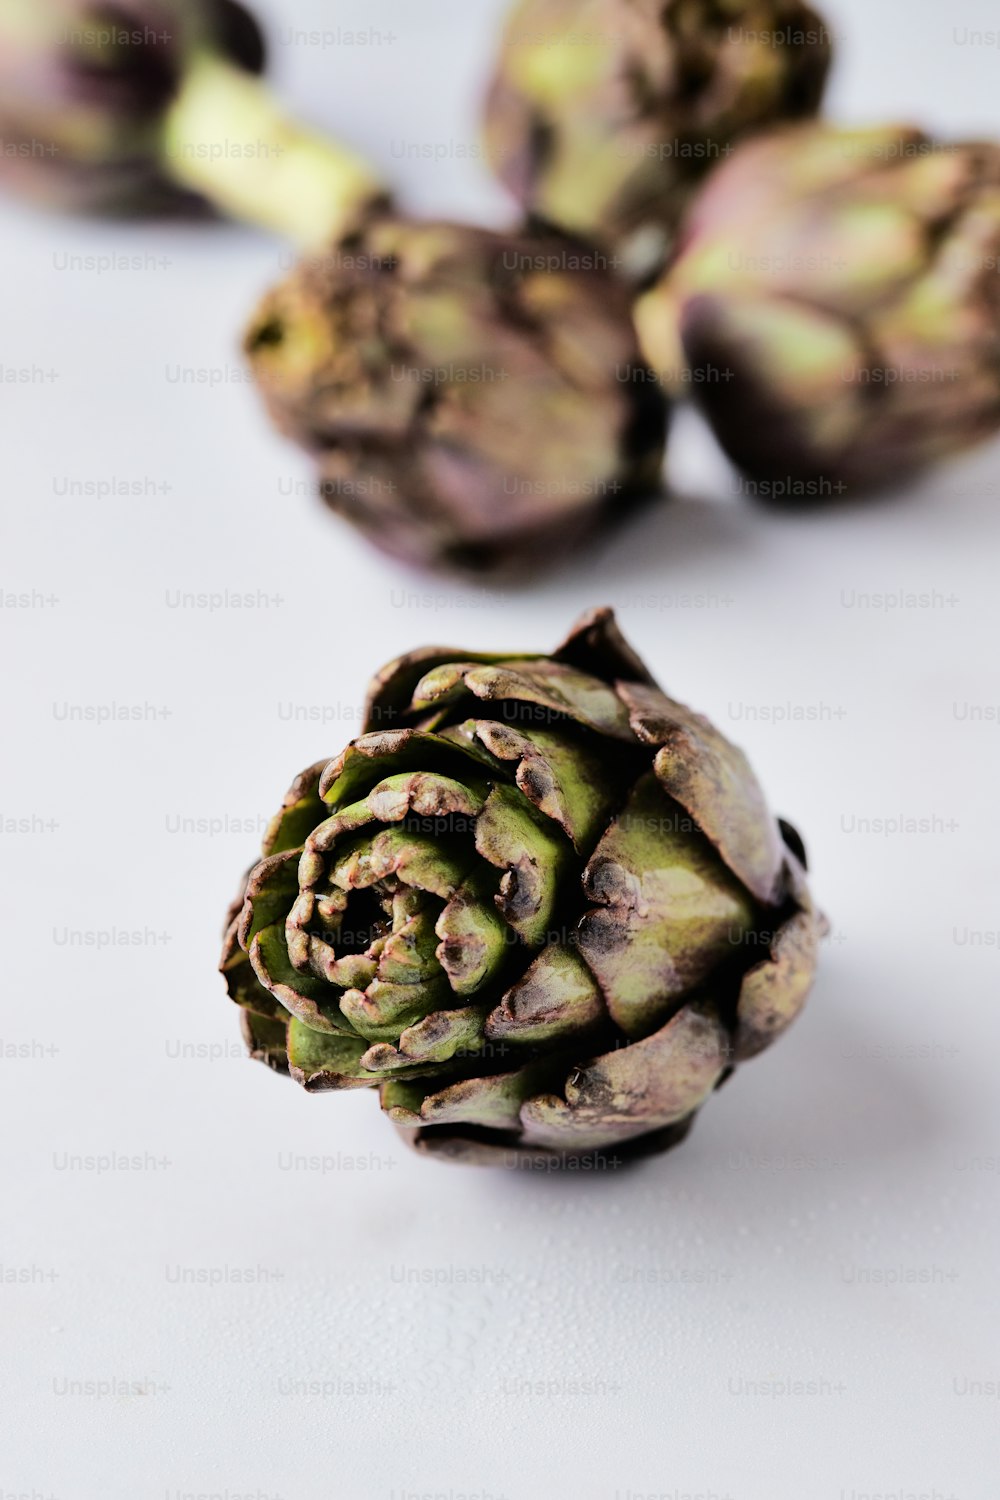 an artichoke on a white surface with other artichokes